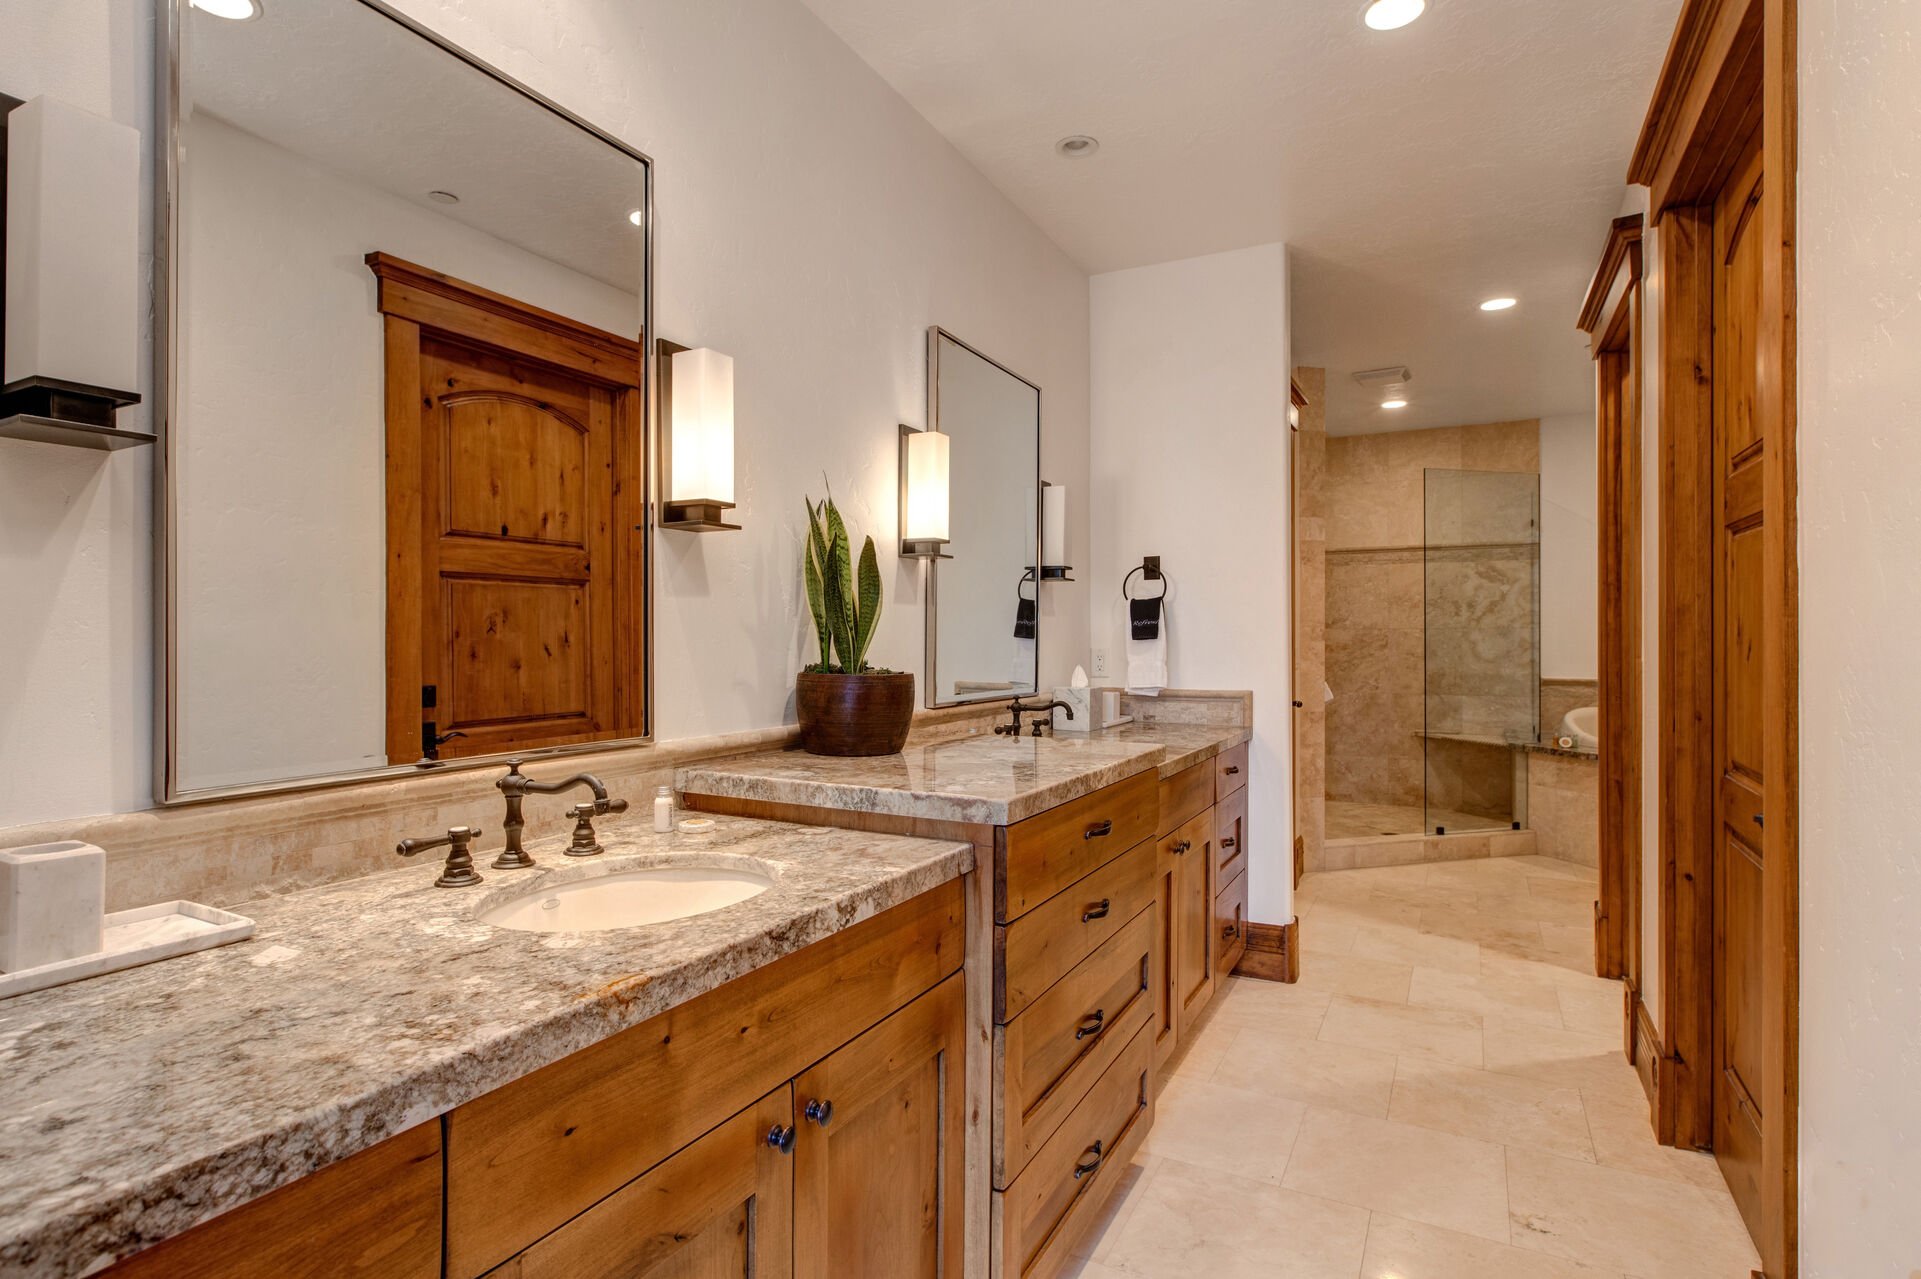 Main Level Grand Master bathroom with two granite vanities, large jetted soaking tub, and oversized tile shower